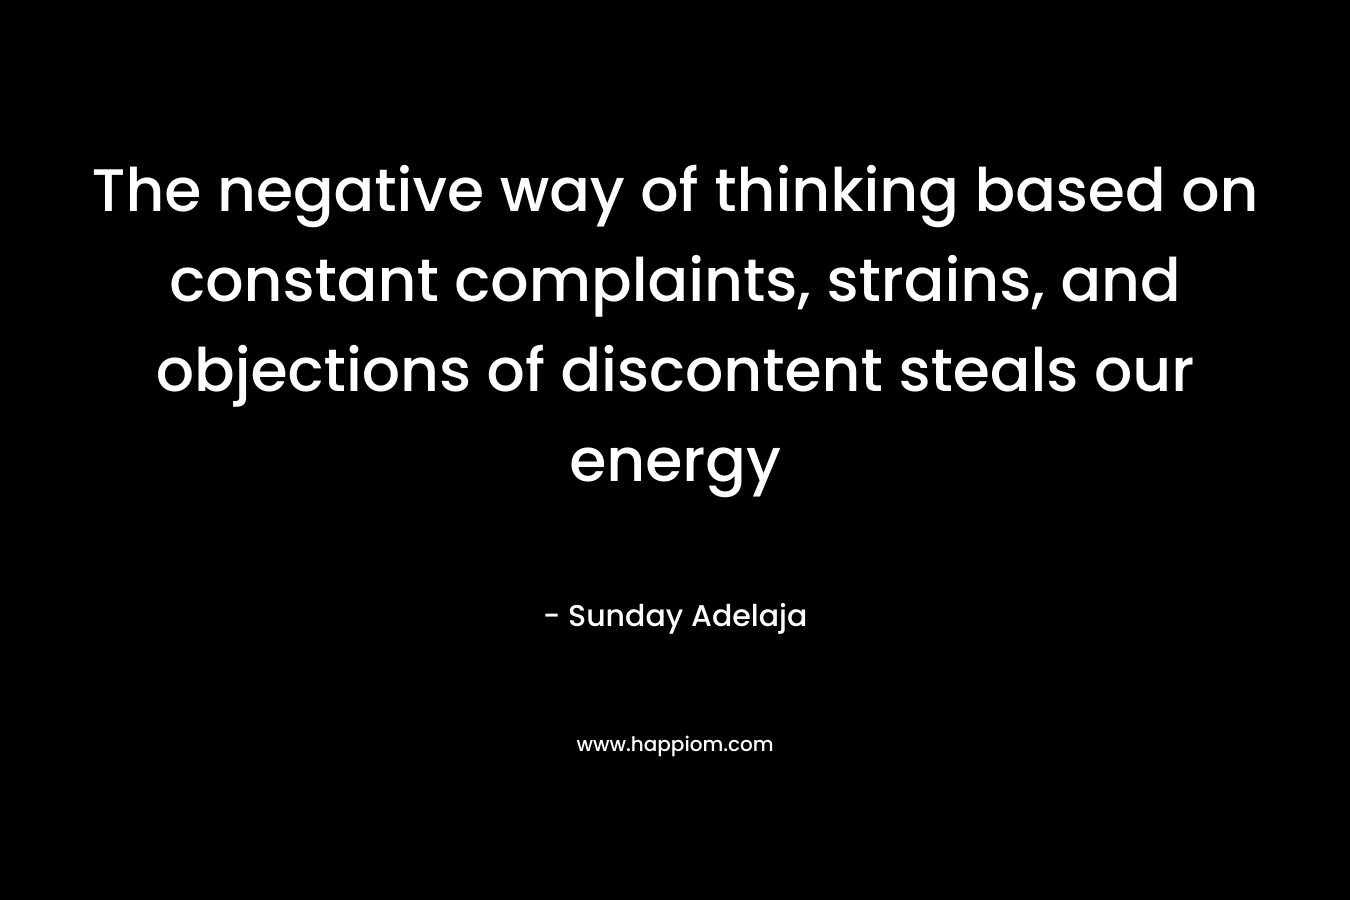 The negative way of thinking based on constant complaints, strains, and objections of discontent steals our energy – Sunday Adelaja